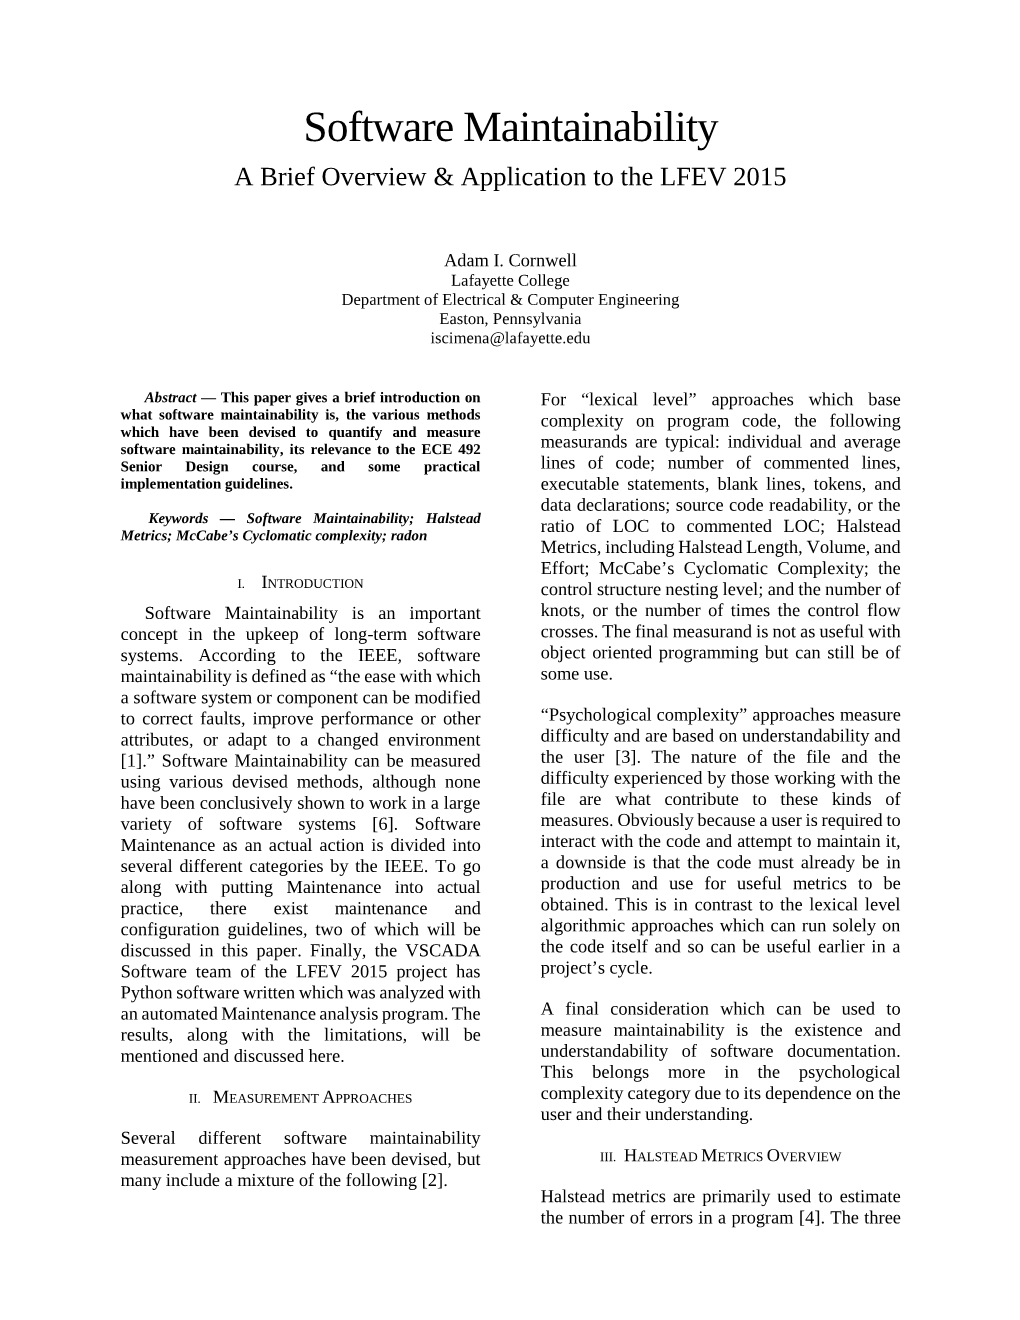 Software Maintainability a Brief Overview & Application to the LFEV 2015